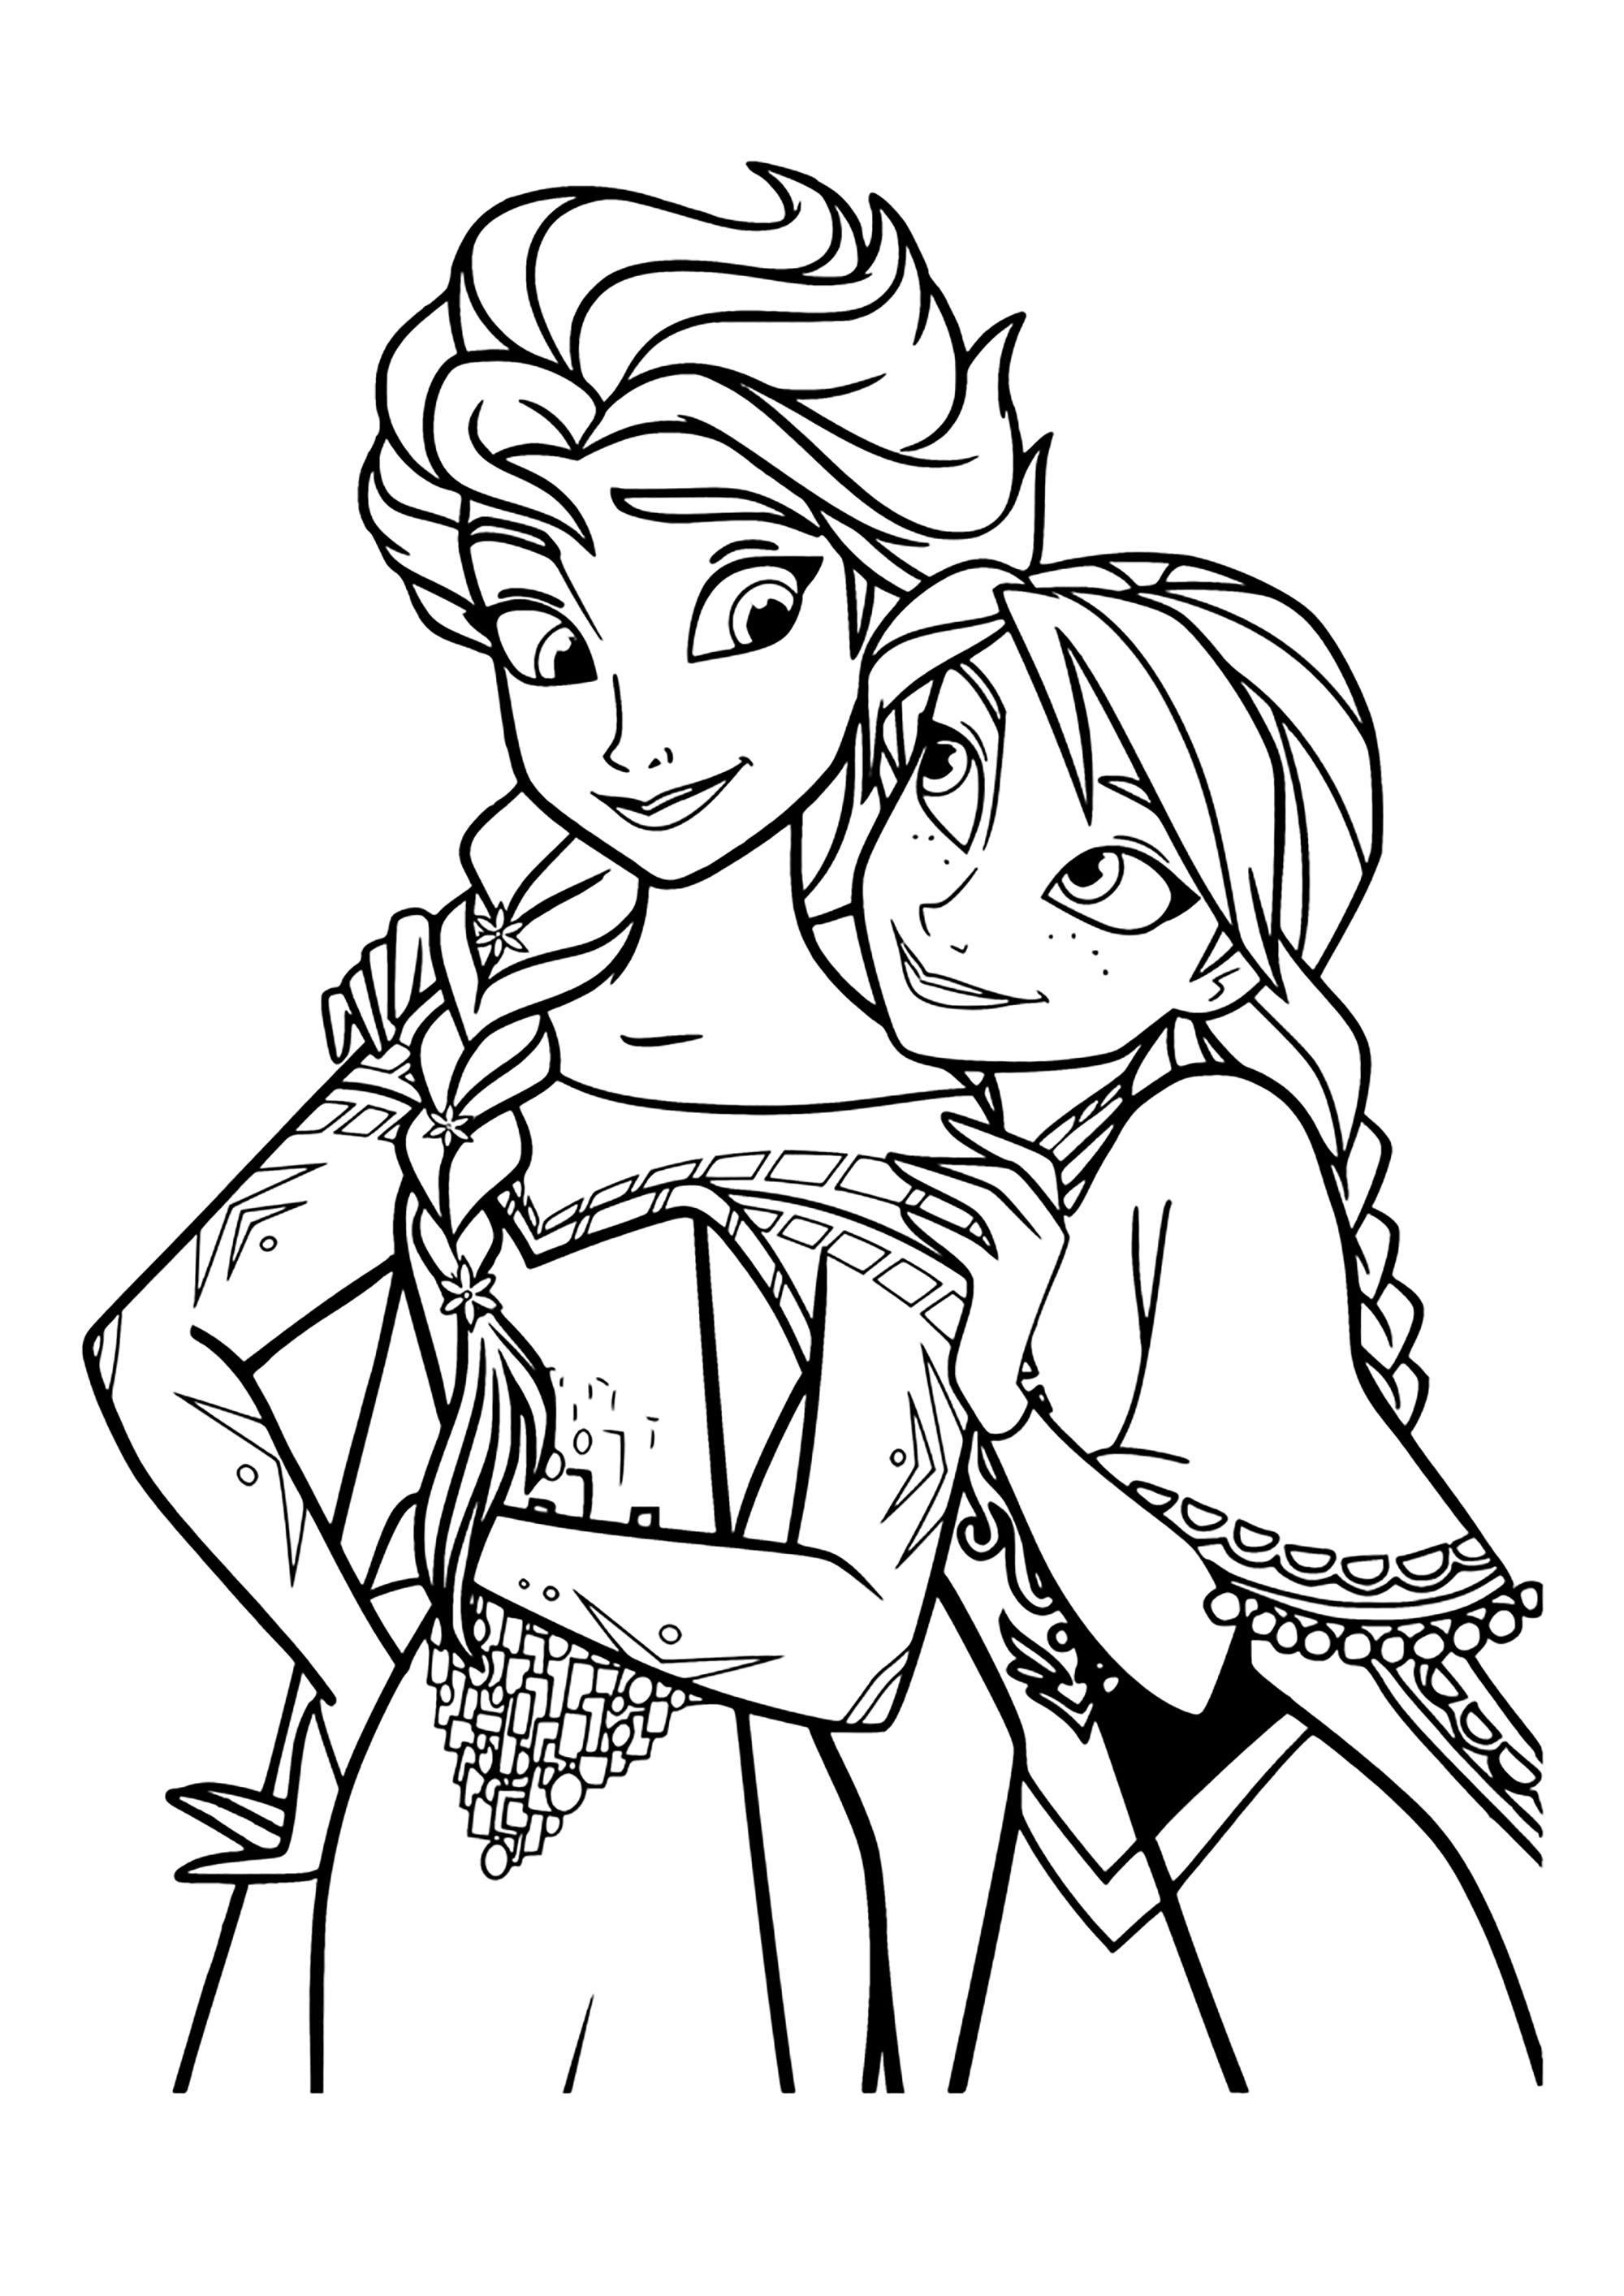 Frozen 200 to color for kids   Frozen 200 Kids Coloring Pages